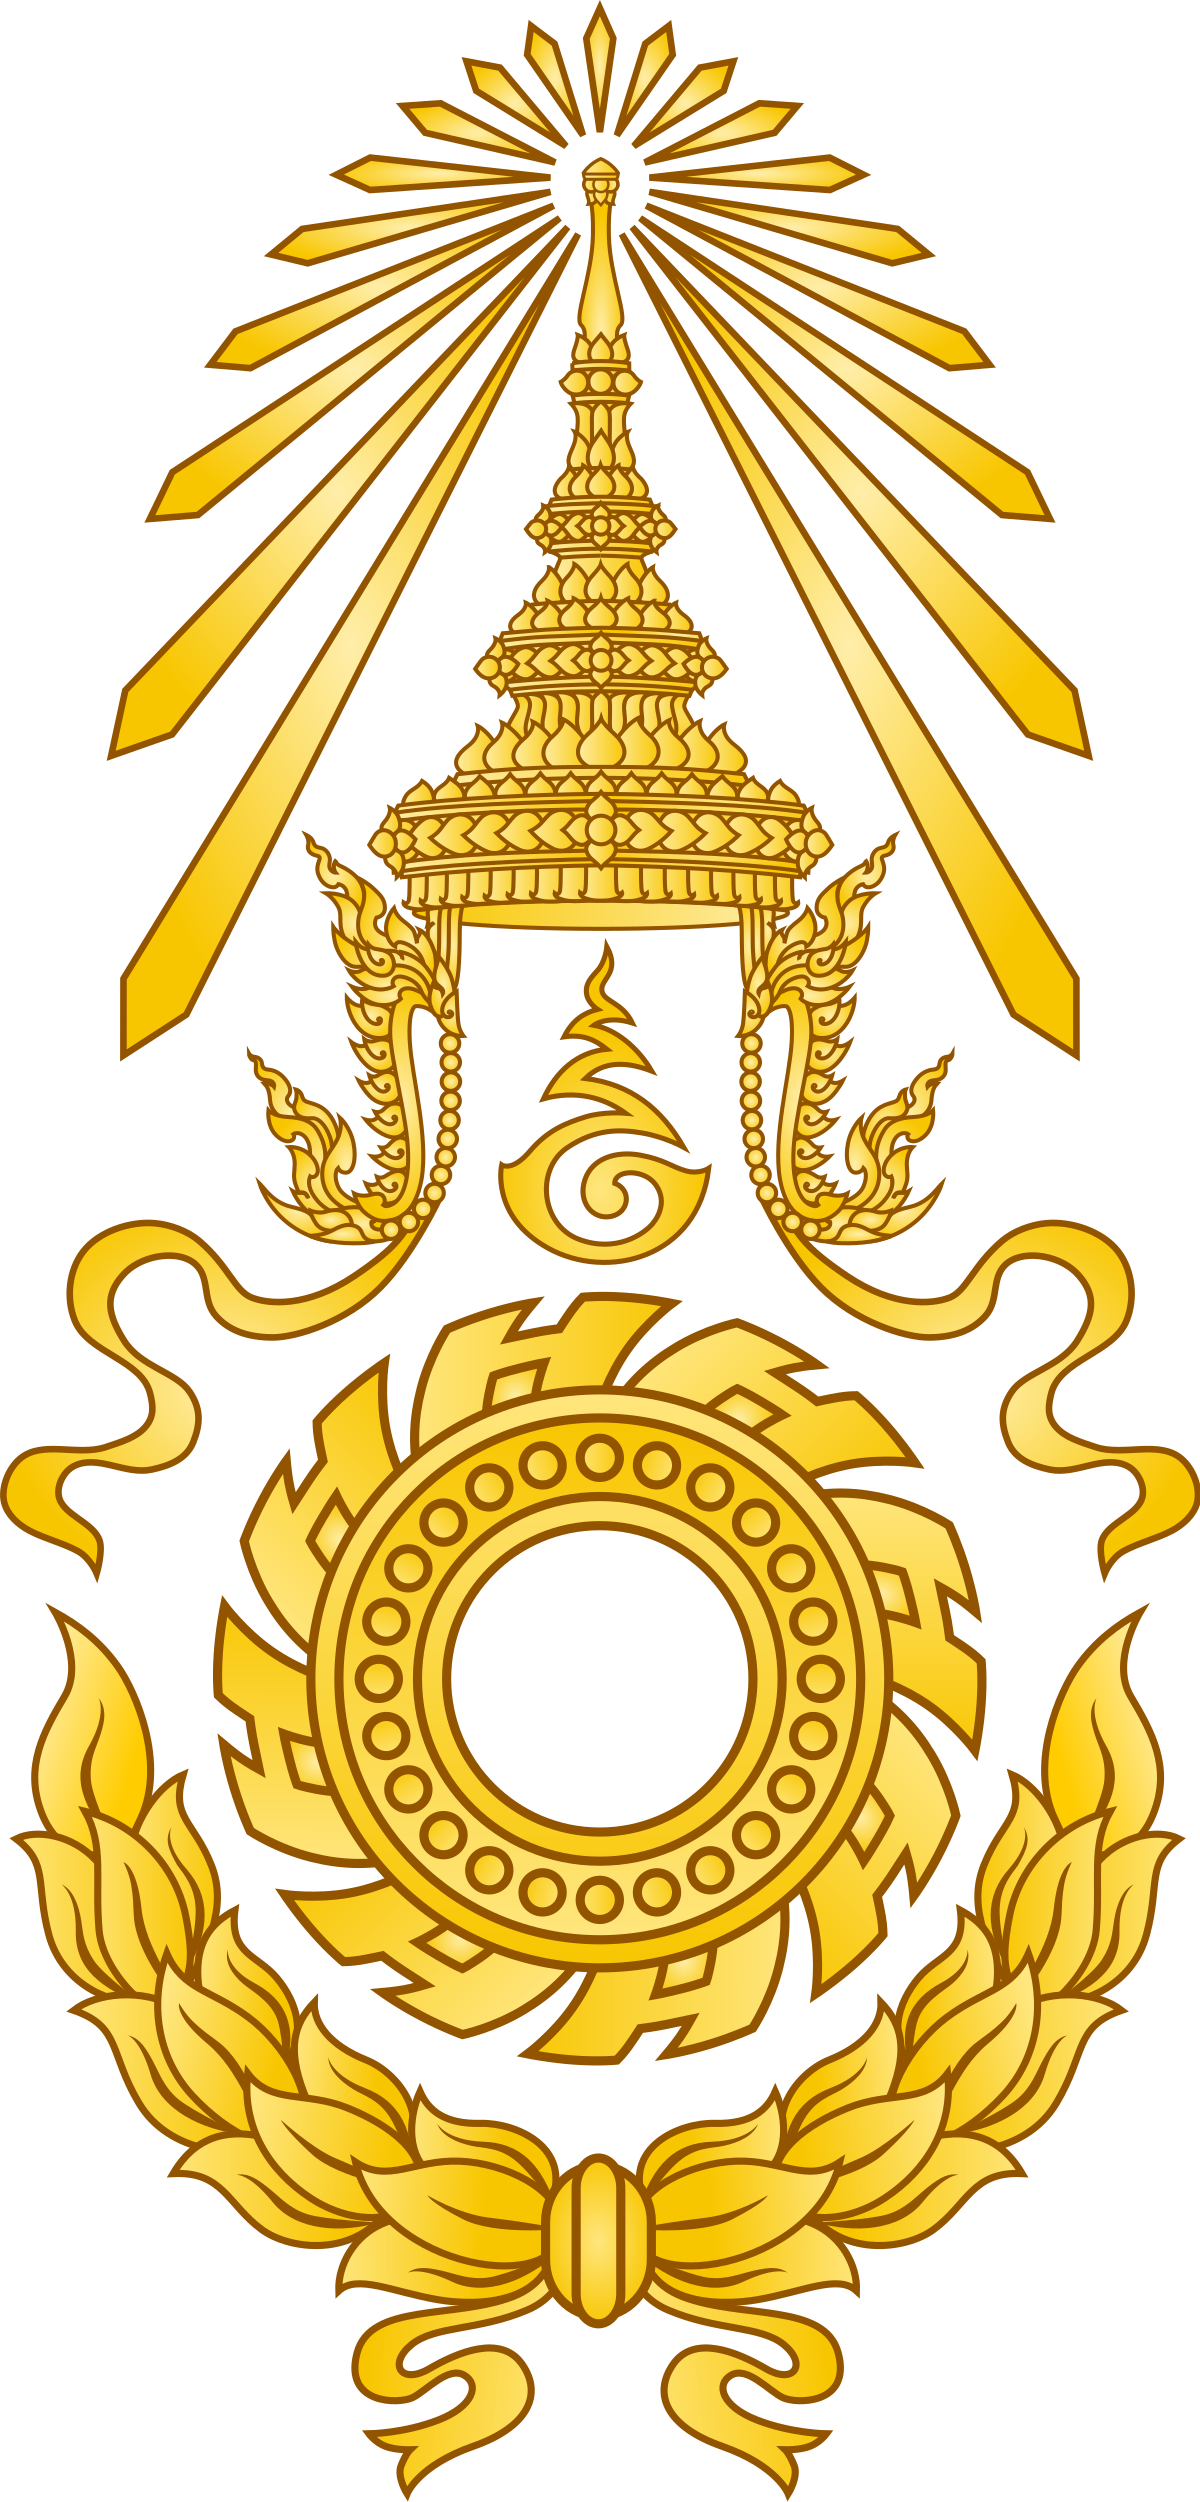 1200px-Emblem_of_the_Royal_Thai_Army.svg.png